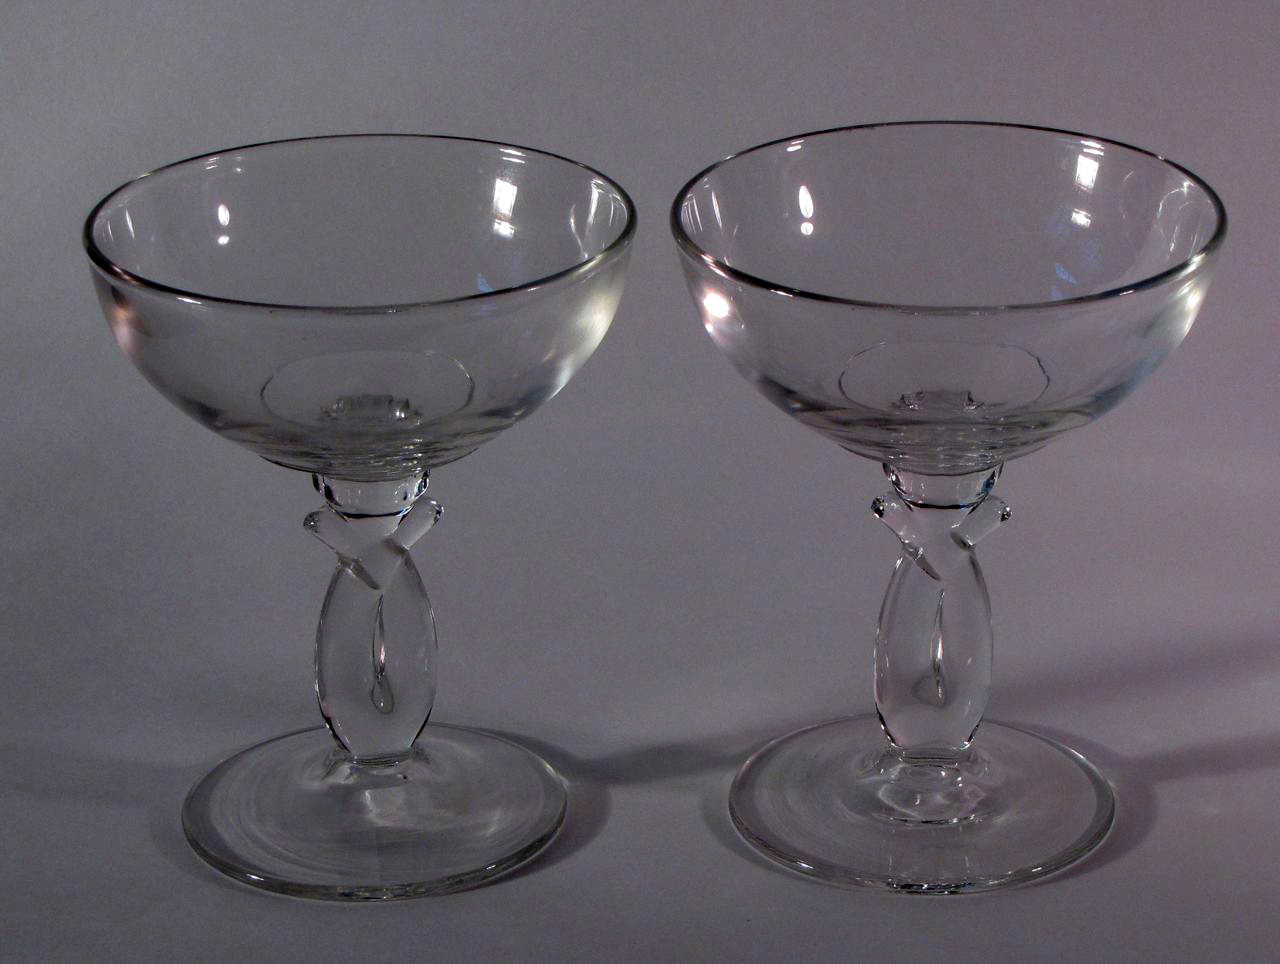 Heisey #5040 Lariat oyster coctail 4.5 oz. crystal 1947-1957